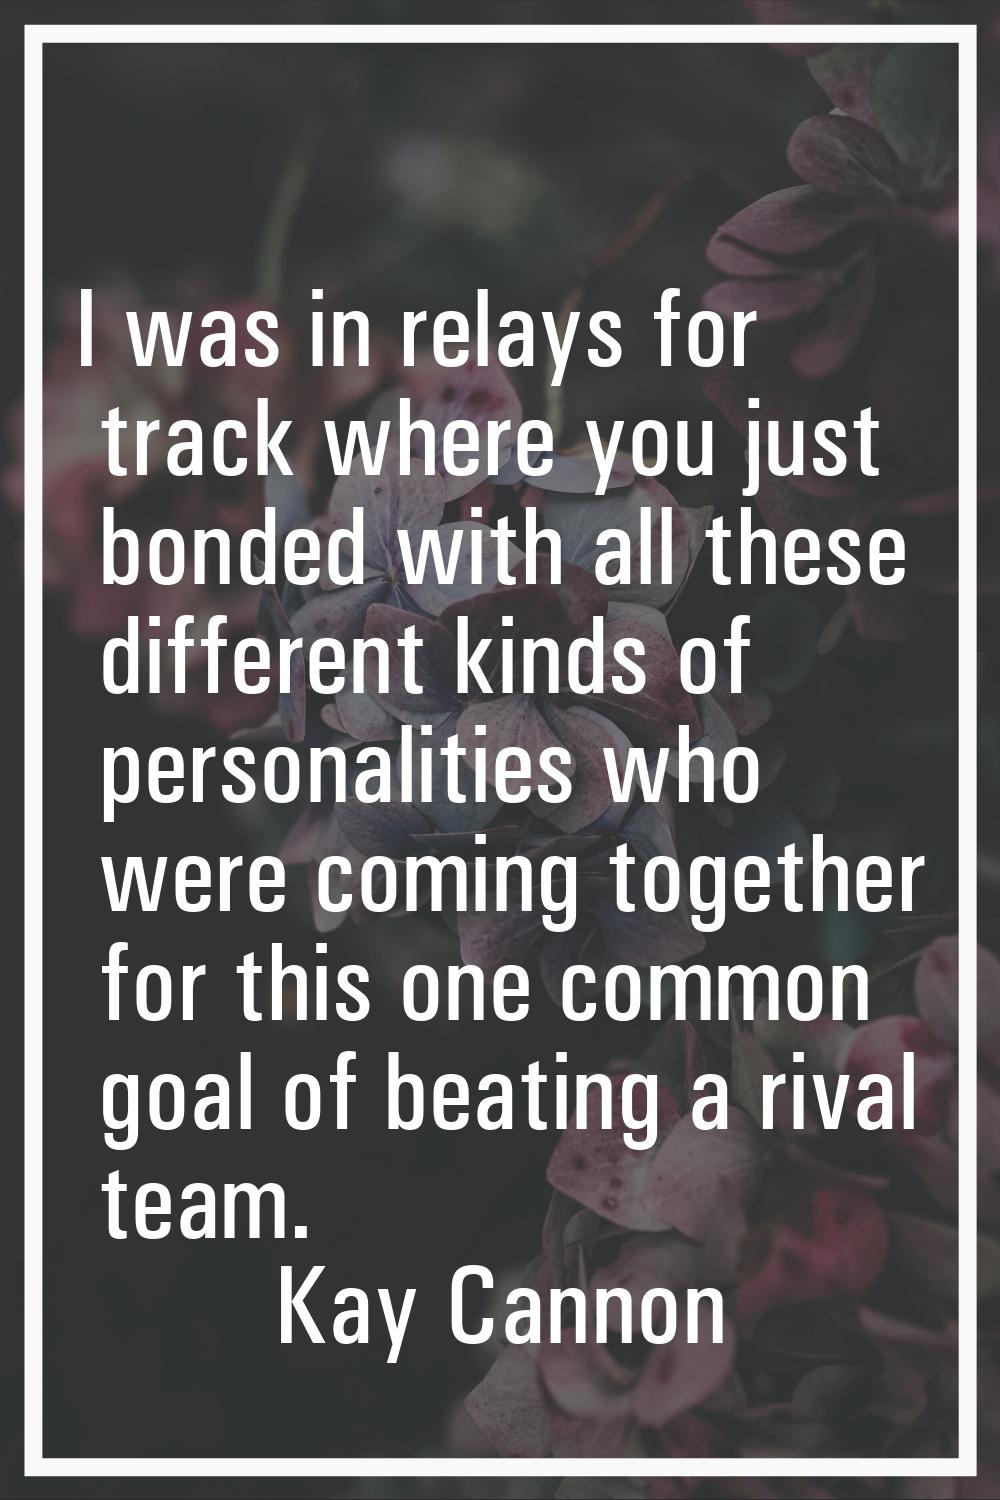 I was in relays for track where you just bonded with all these different kinds of personalities who